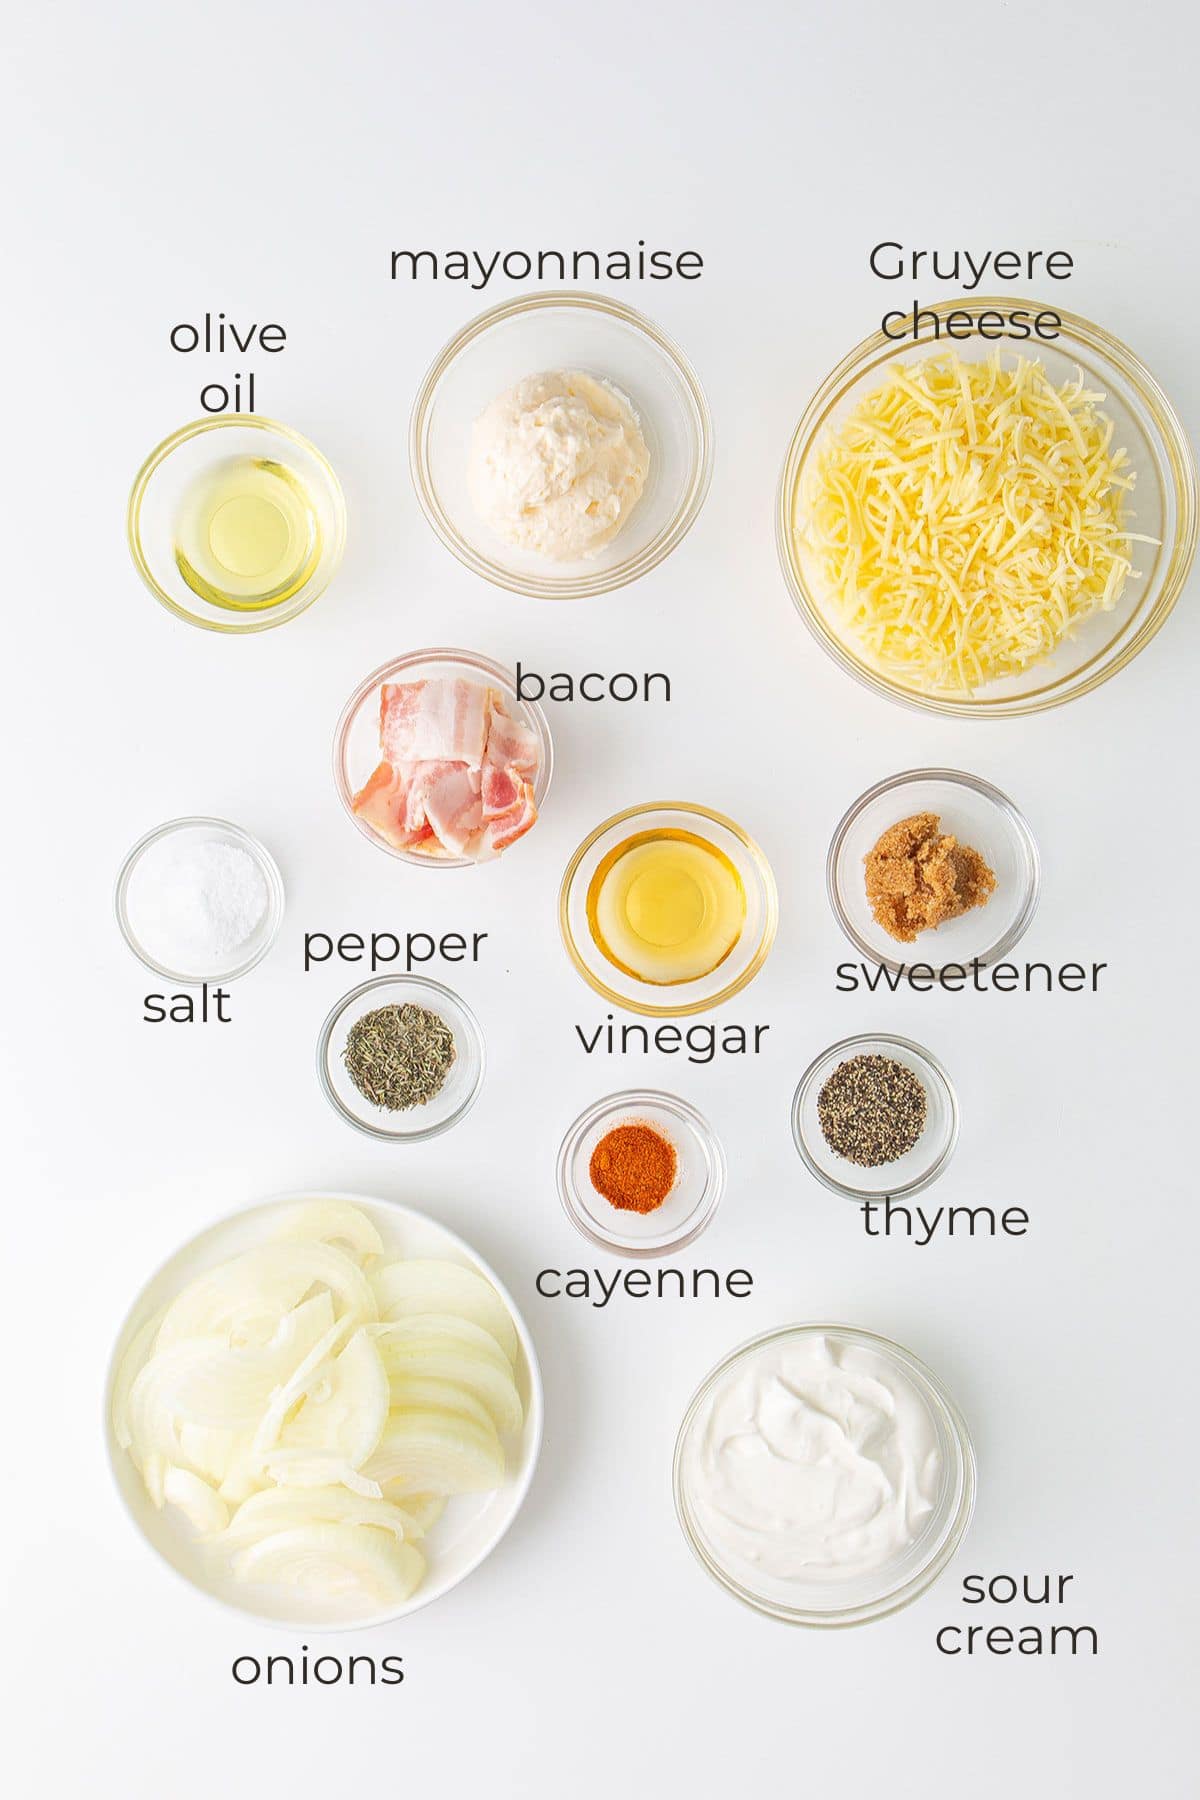 Top down image of ingredients needed for Caramelized Onion Dip.